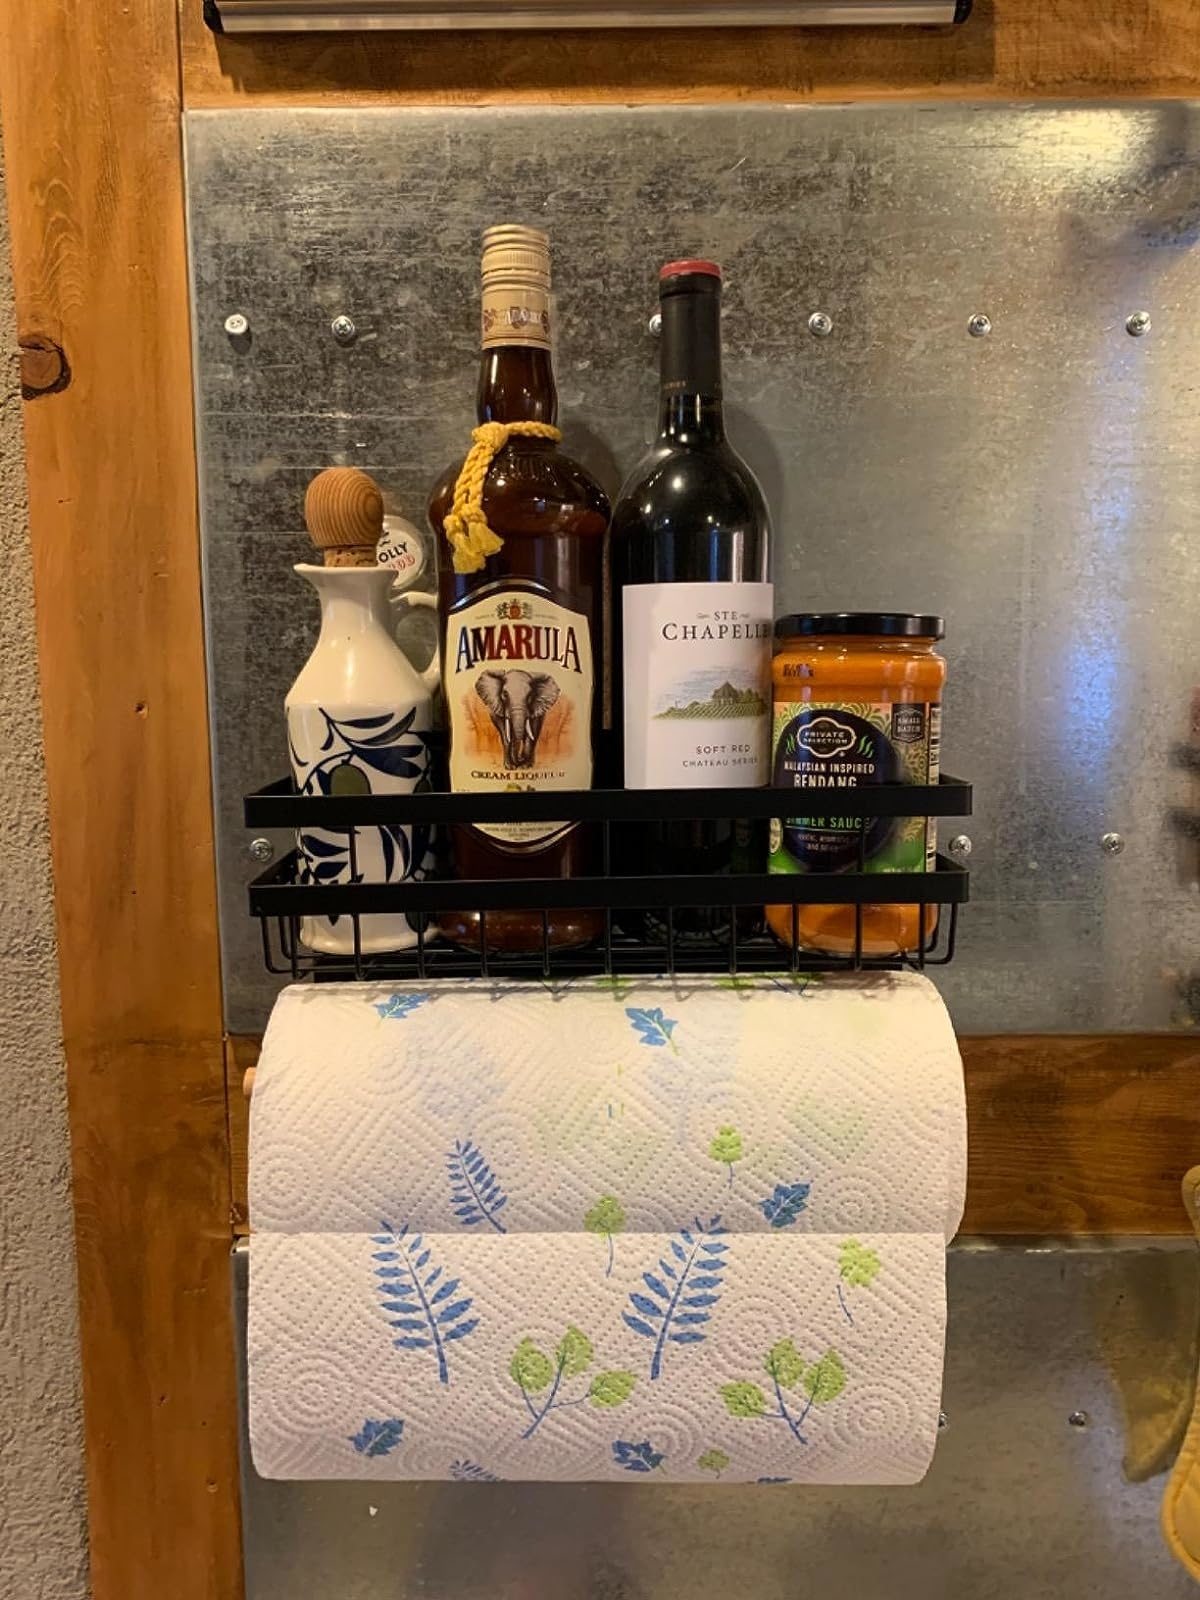 Reviewer image of paper towels and condiments stored in the magnetic holder